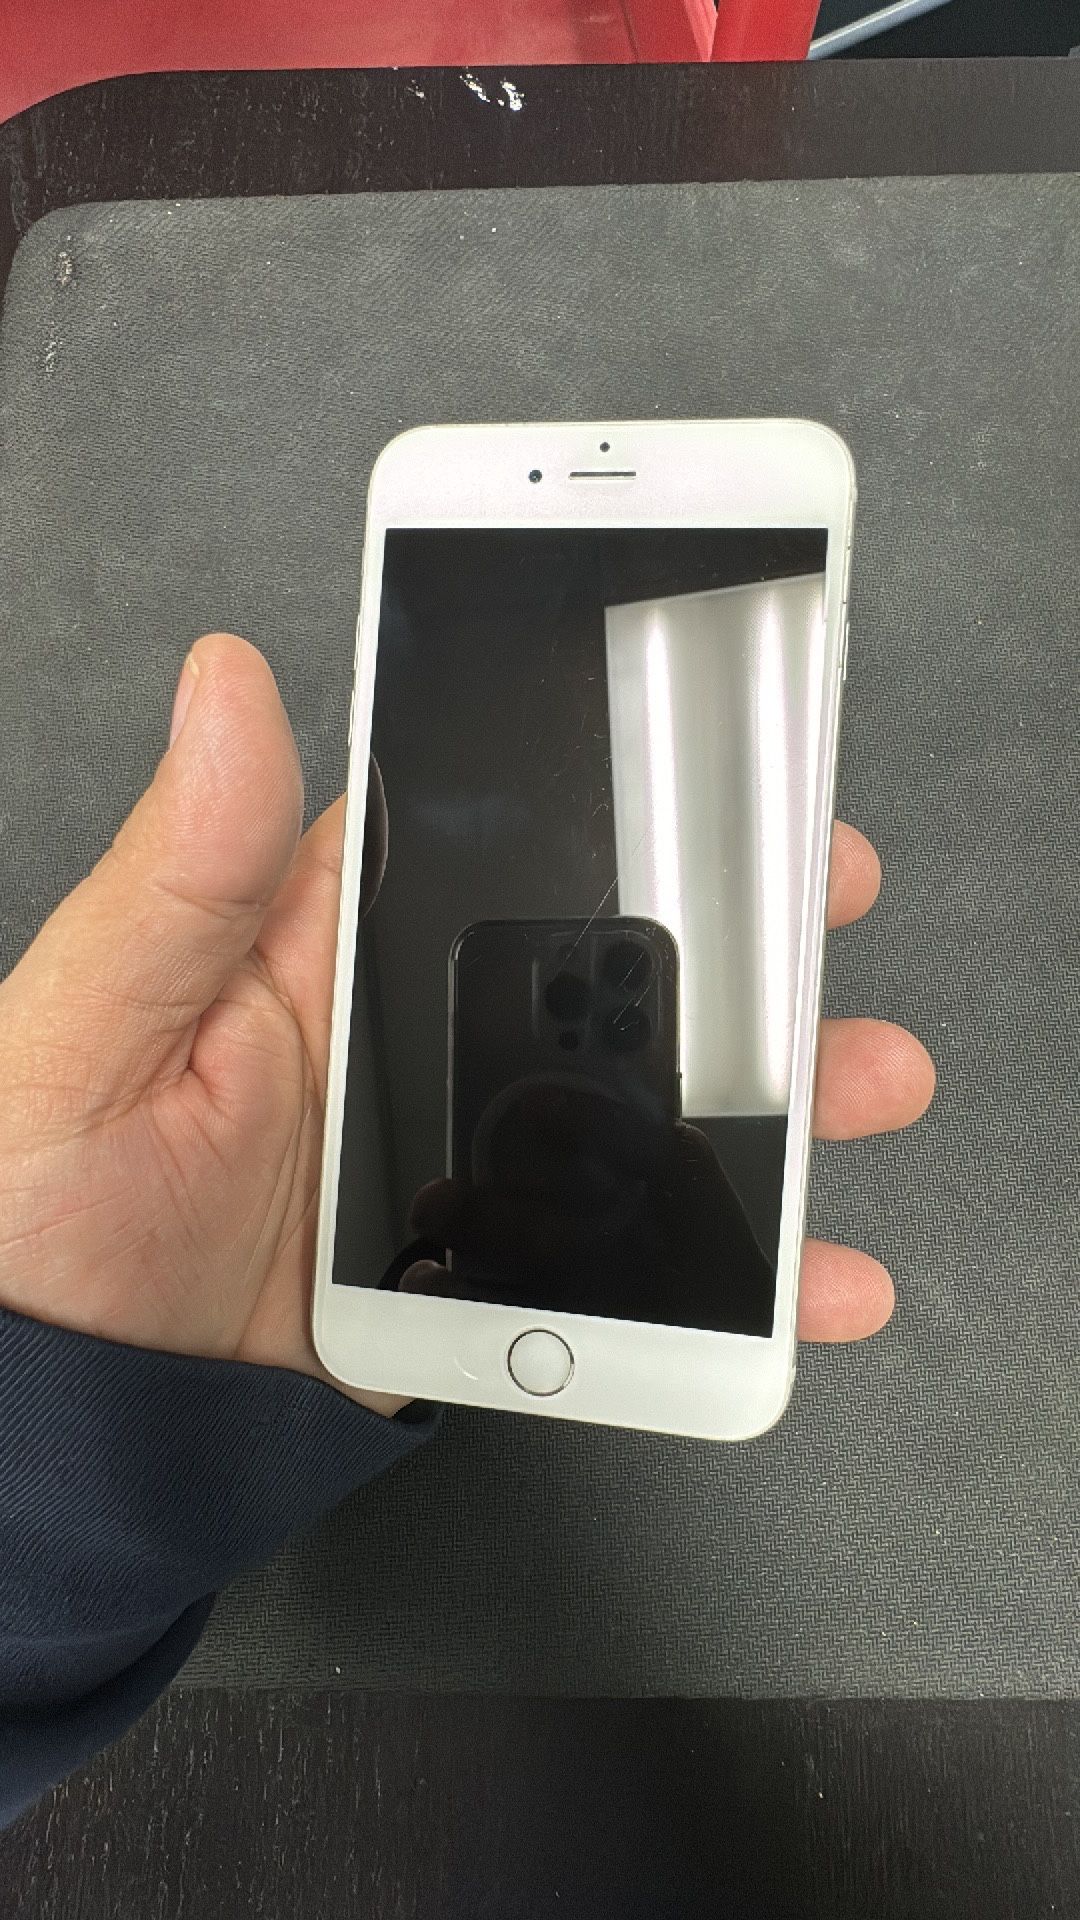 Apple iPhone 6s Plus 64 GB AT&T, or cricket wireless only